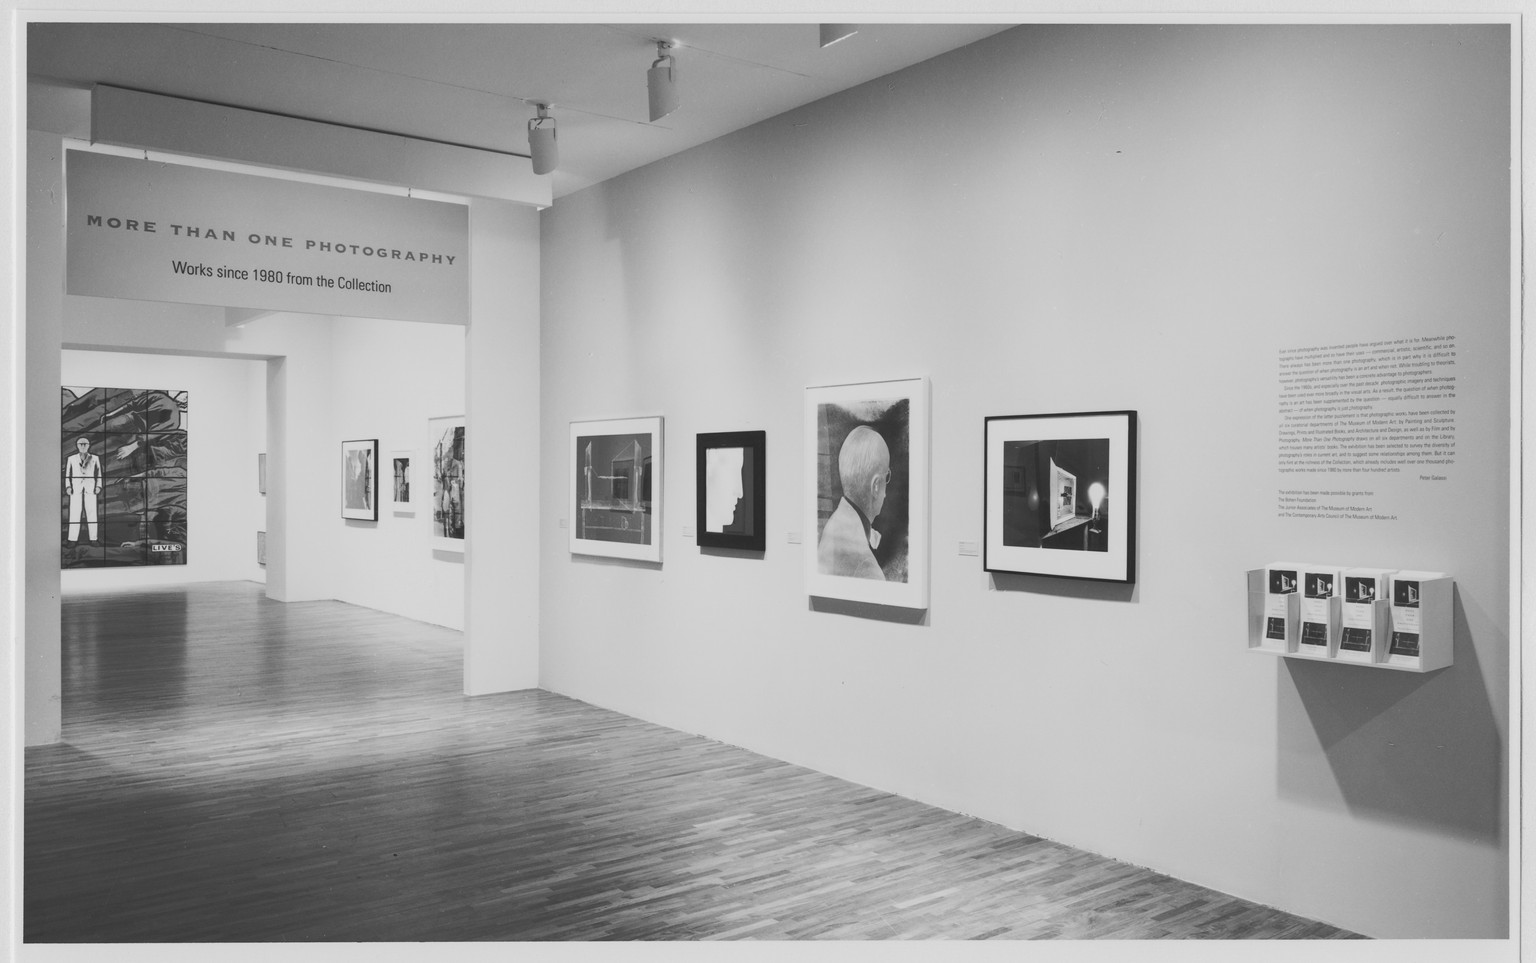 More than Photography: Works since 1980 from the Collection | MoMA